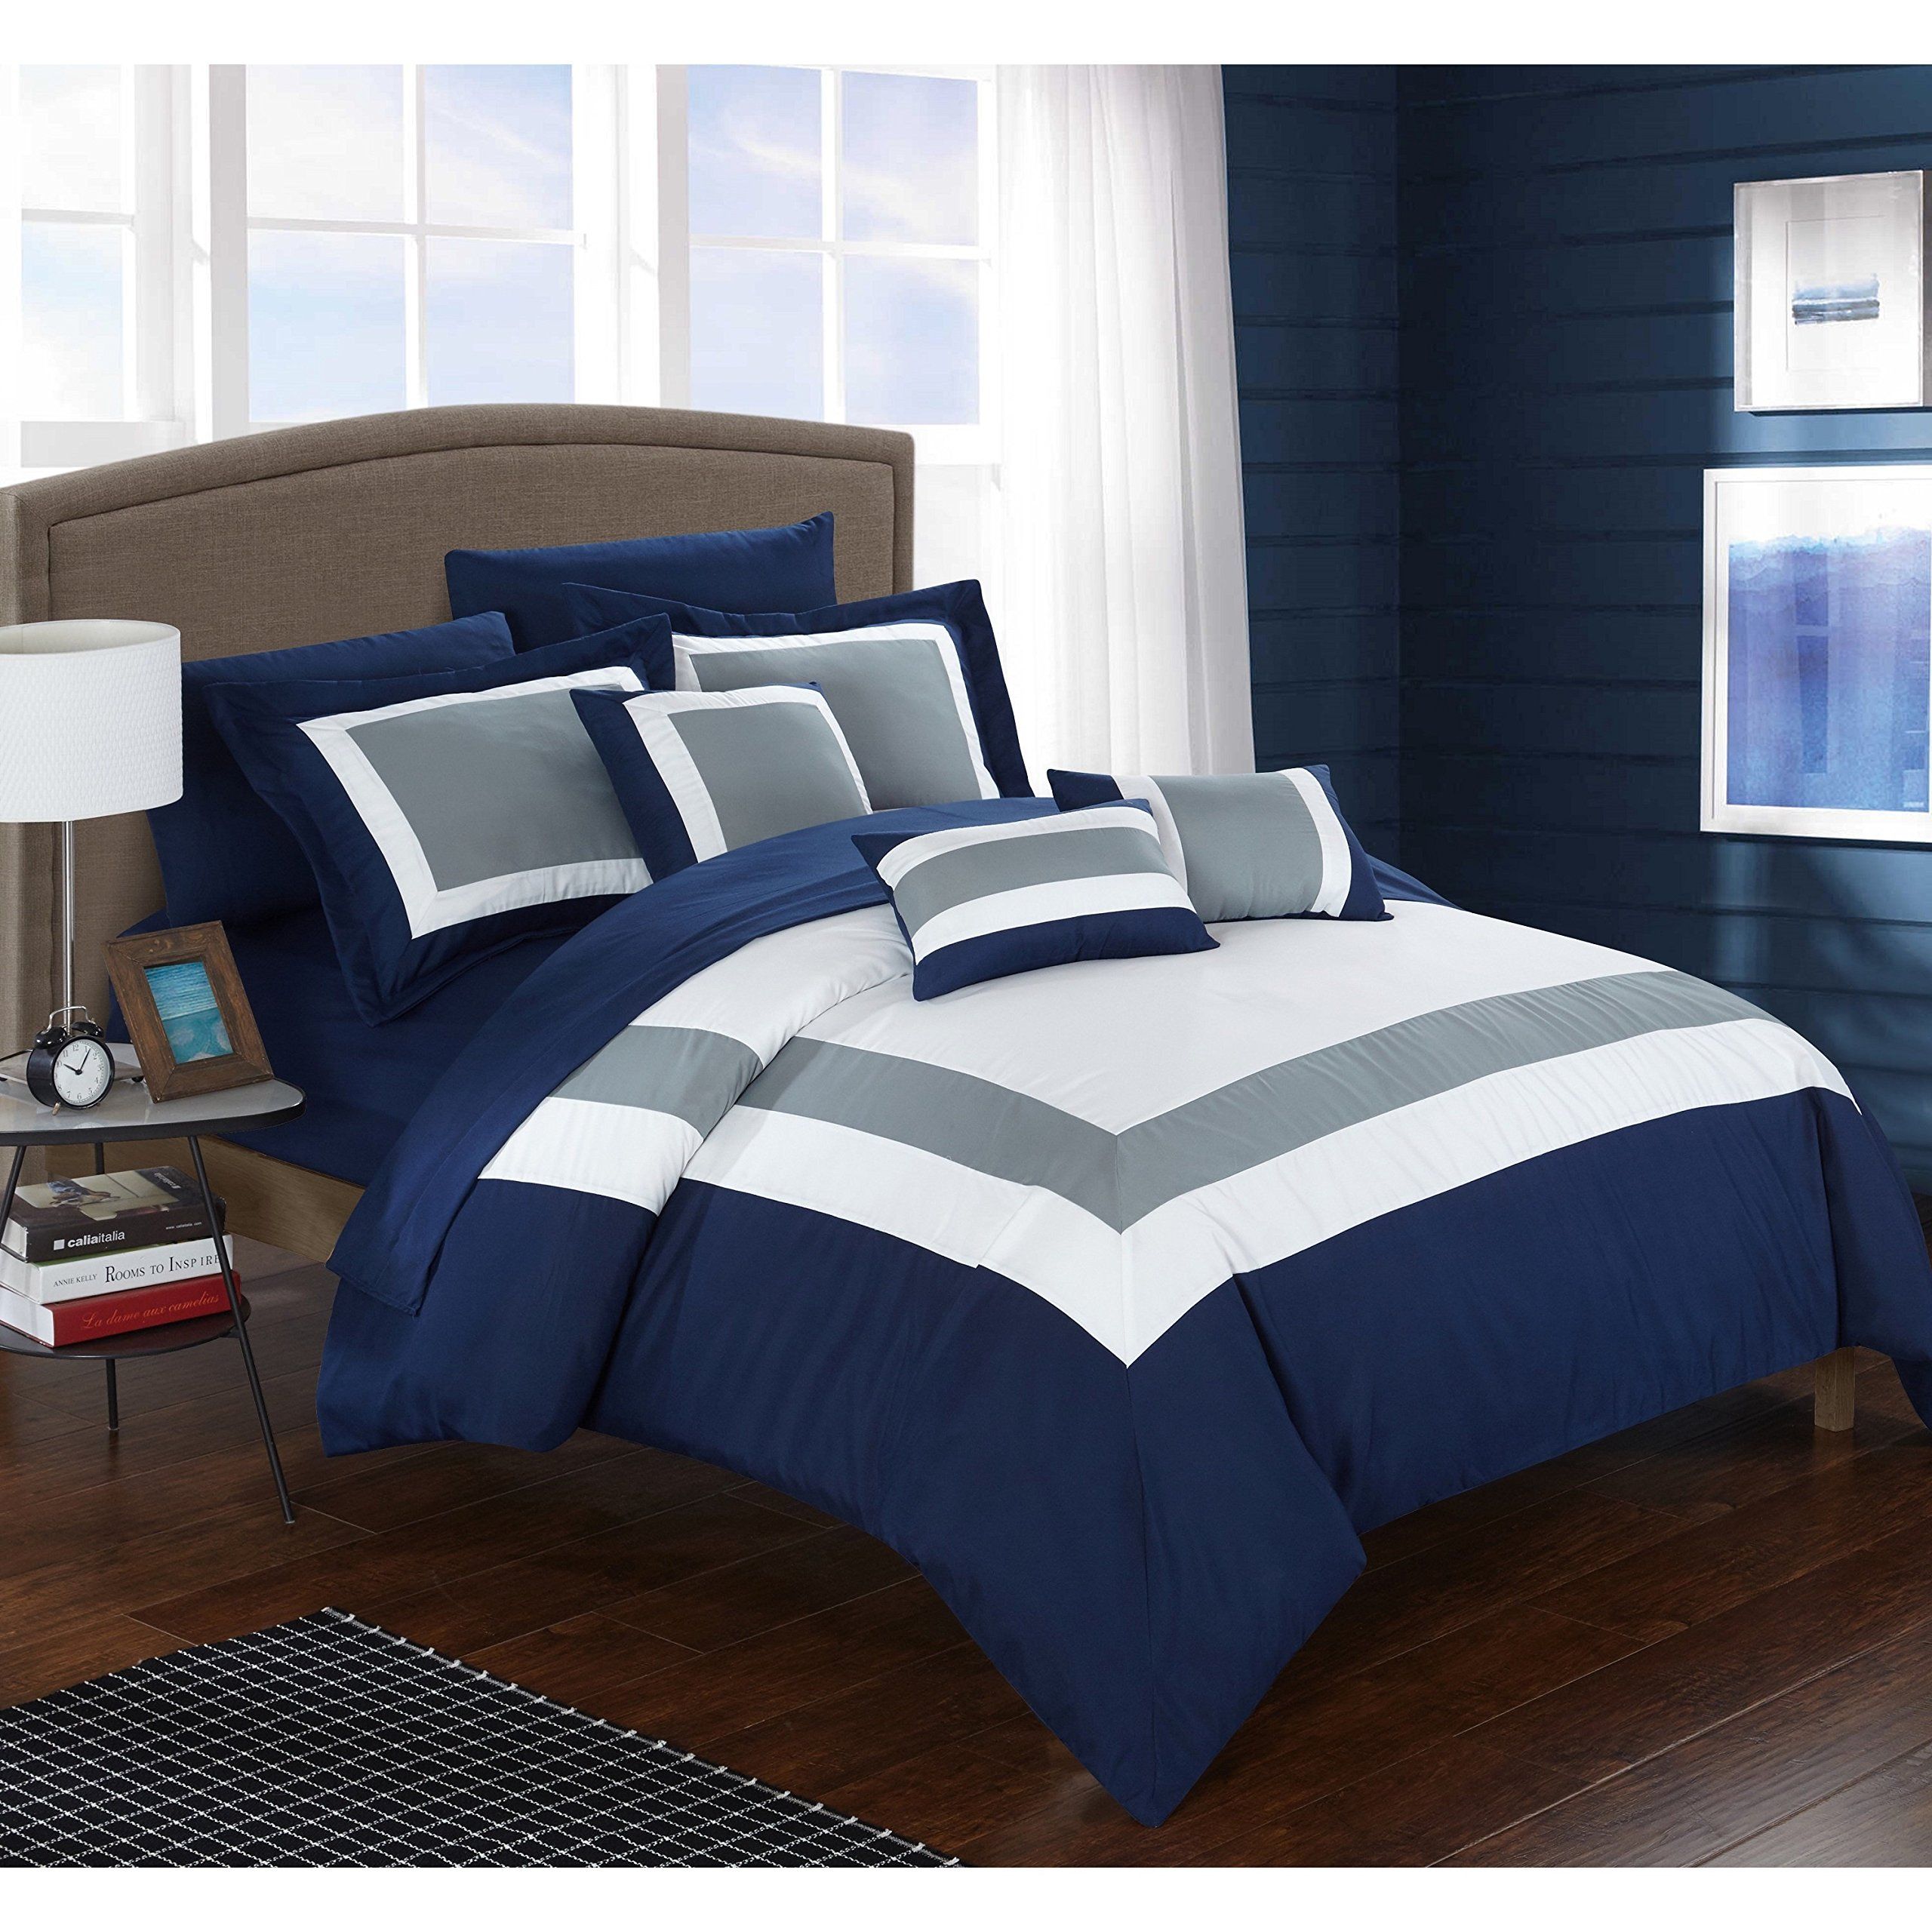 Buy 10 Piece Navy Blue Grey Geometric Comforter Queen Set, White Color With Navy Blue And White Striped Ottomans (View 18 of 20)